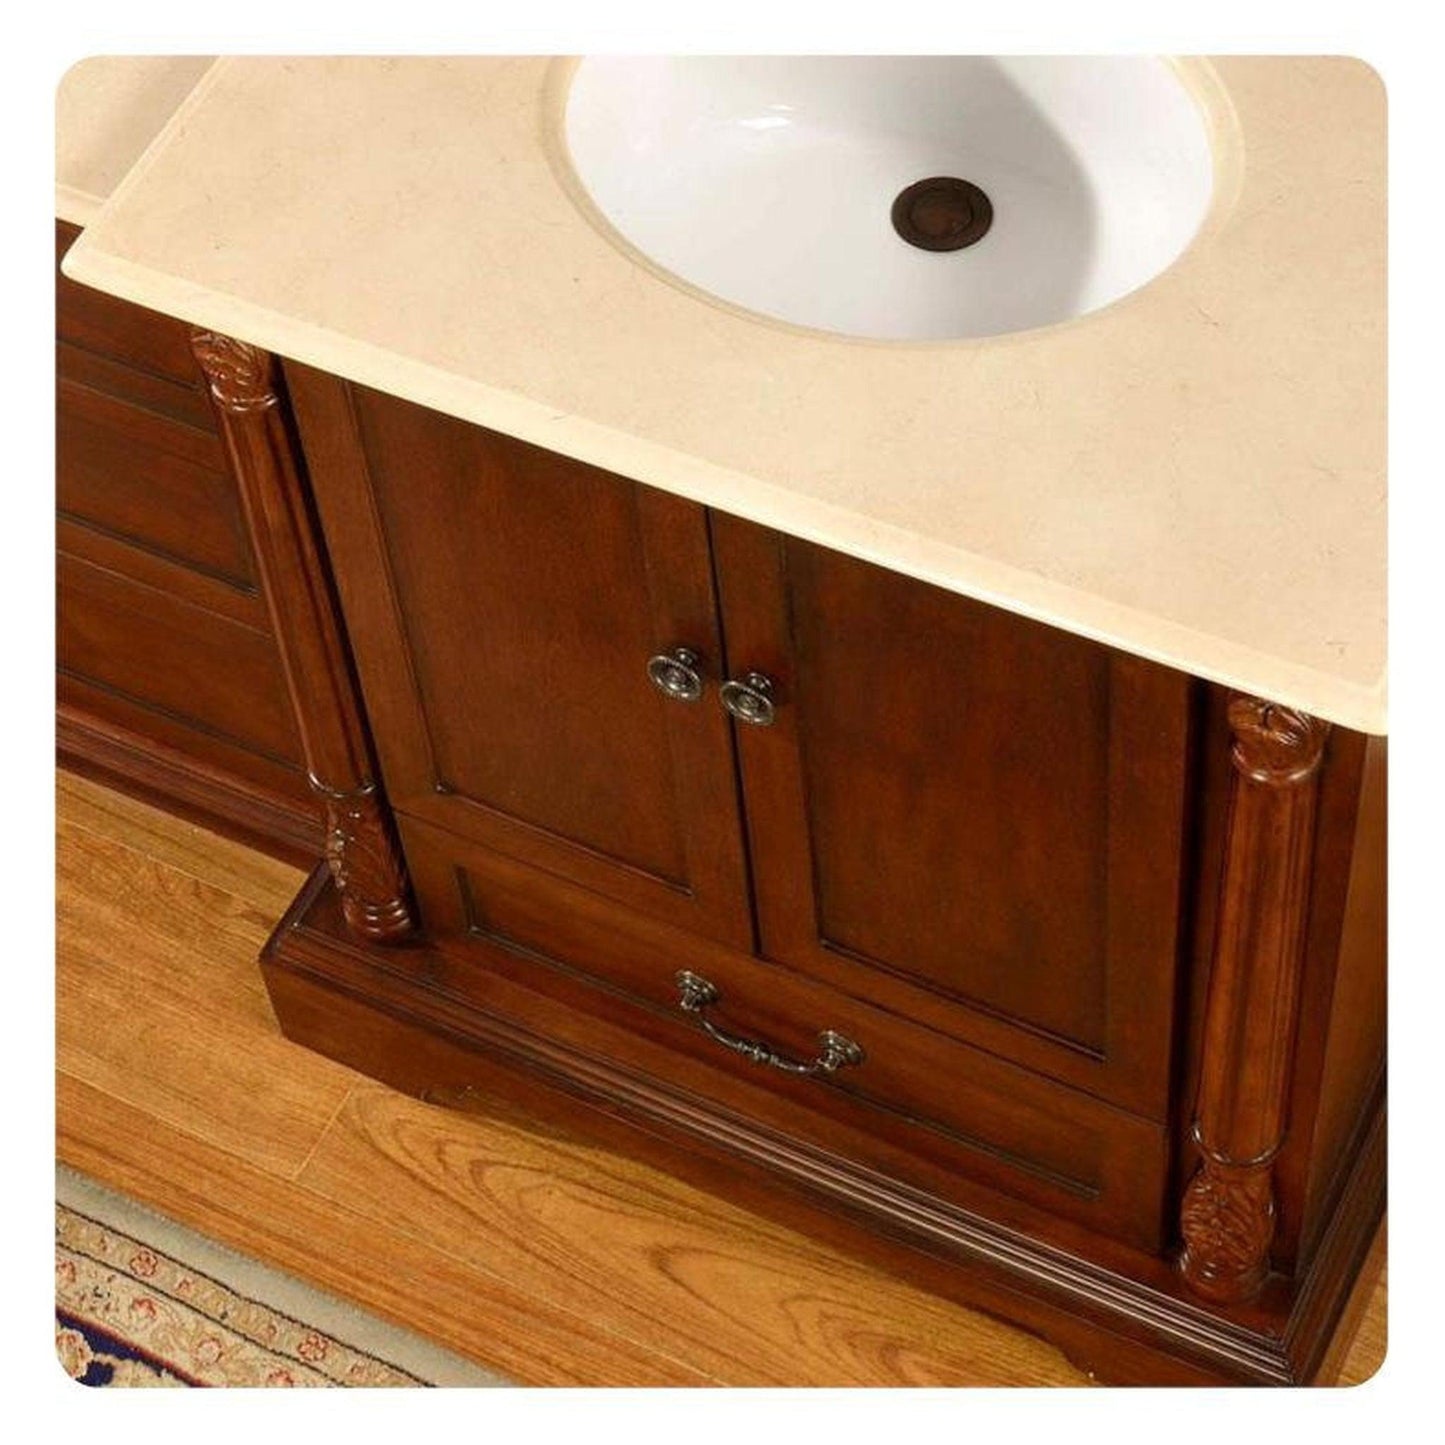 Silkroad Exclusive 87" Double Sink Walnut Modular Bathroom Vanity With Crema Marfil Marble Countertop and White Ceramic Undermount Sink